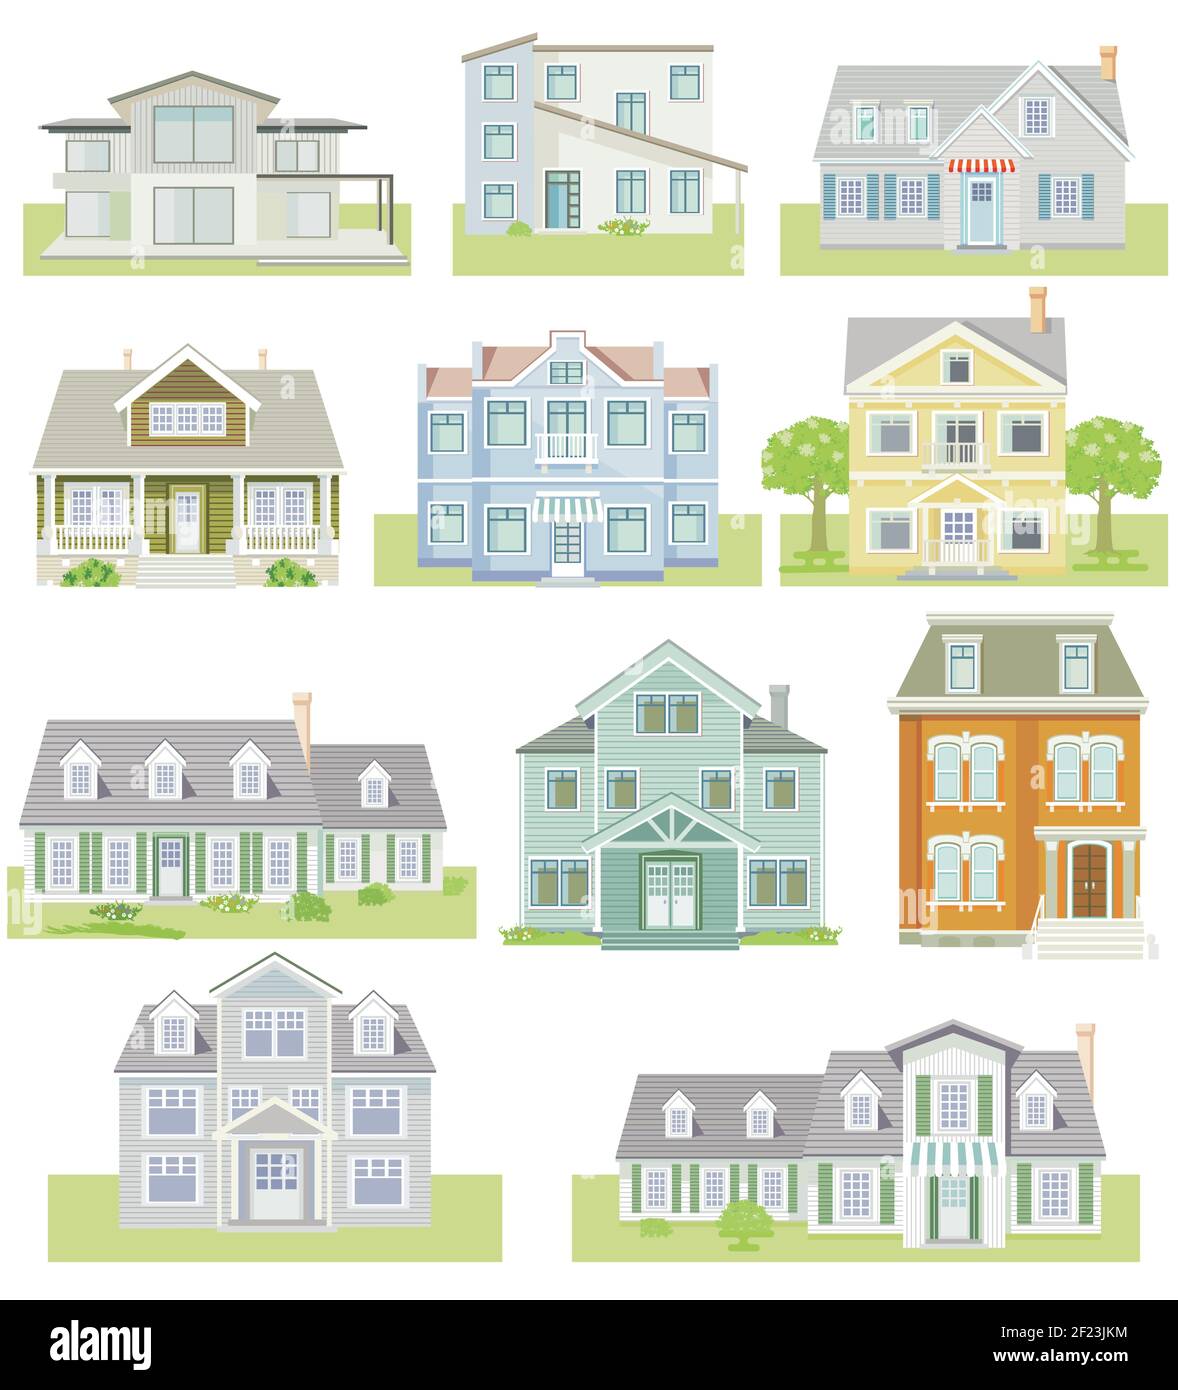 Set of houses and apartment houses, country houses, wooden houses, family houses, illustration Stock Vector